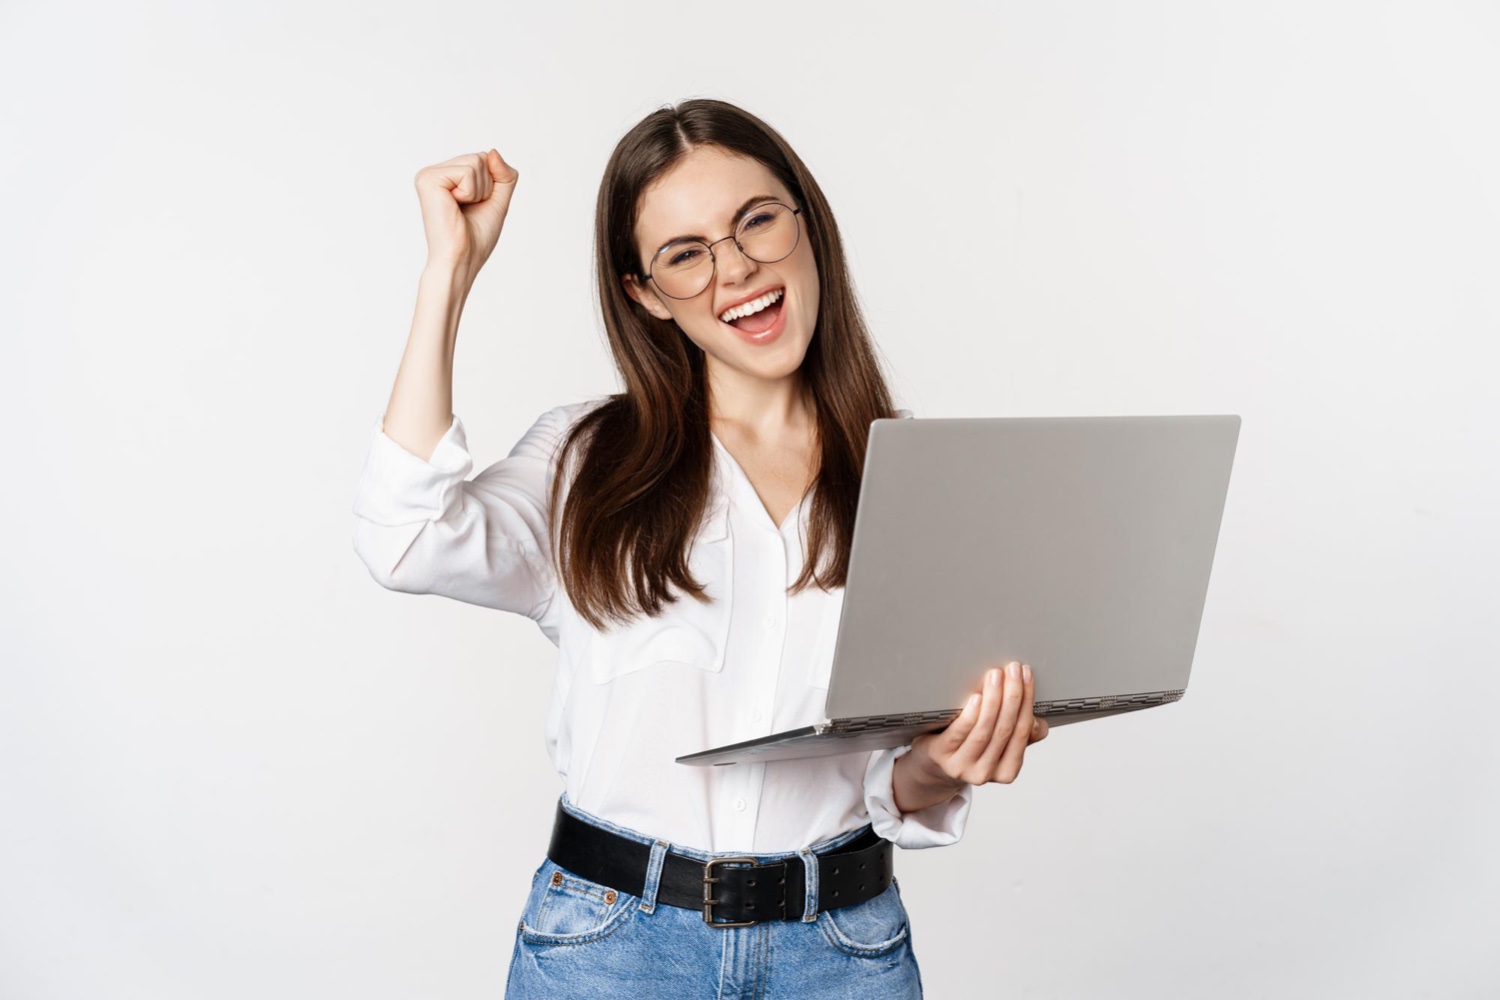 Enthusiastic business woman with laptop who just found her dream career